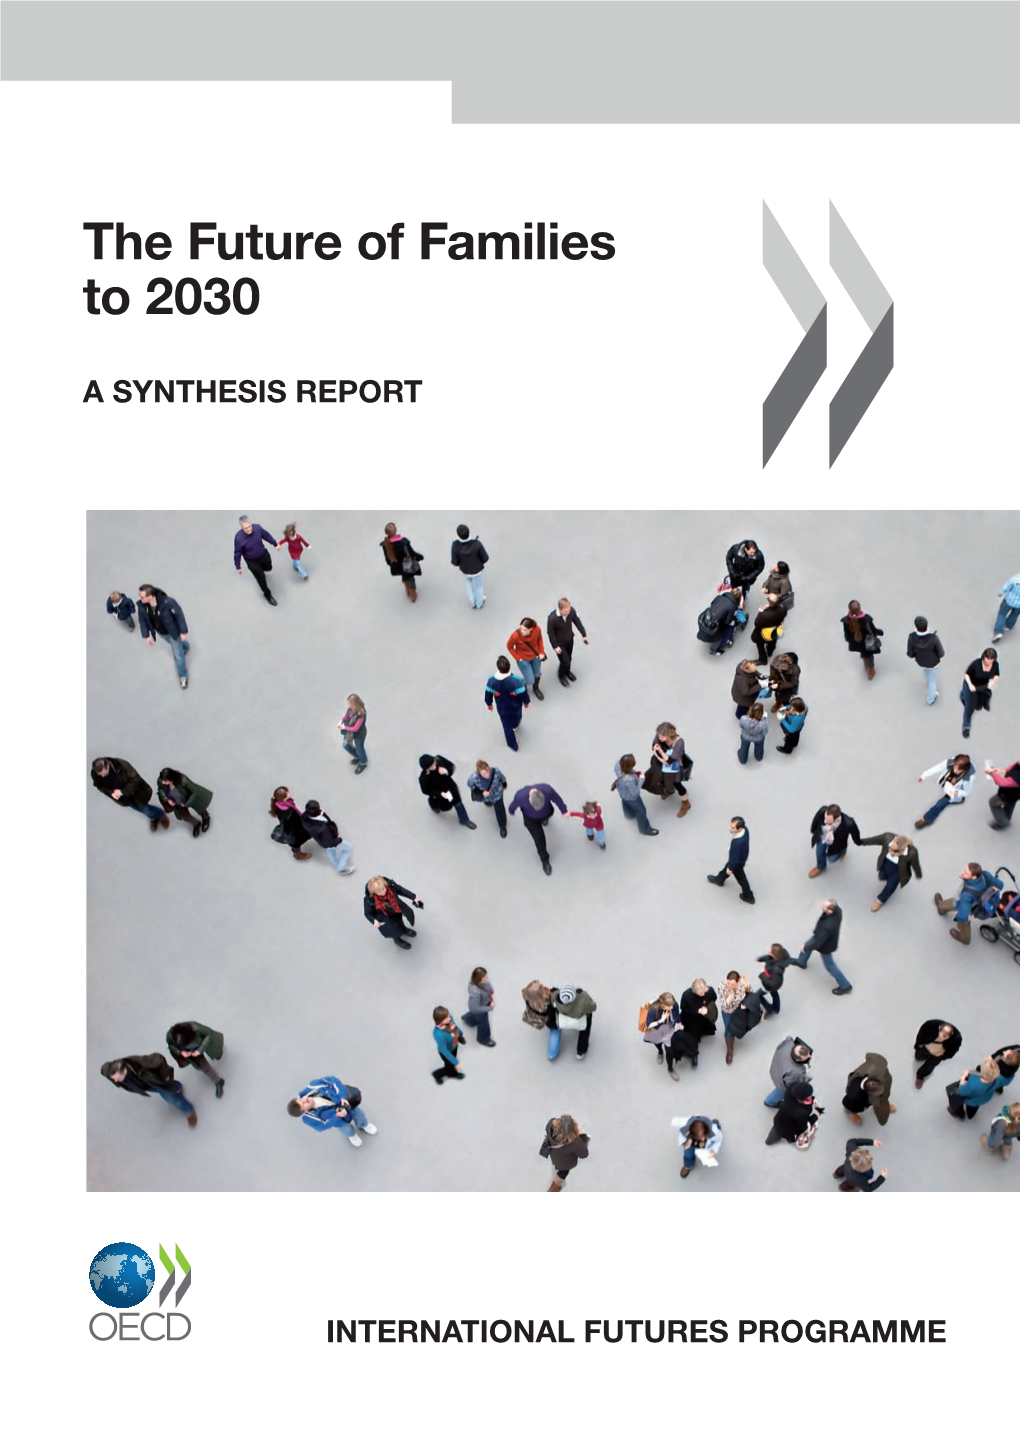 The Future of Families to 2030 the Future of Families a SYNTHESIS REPORT to 2030